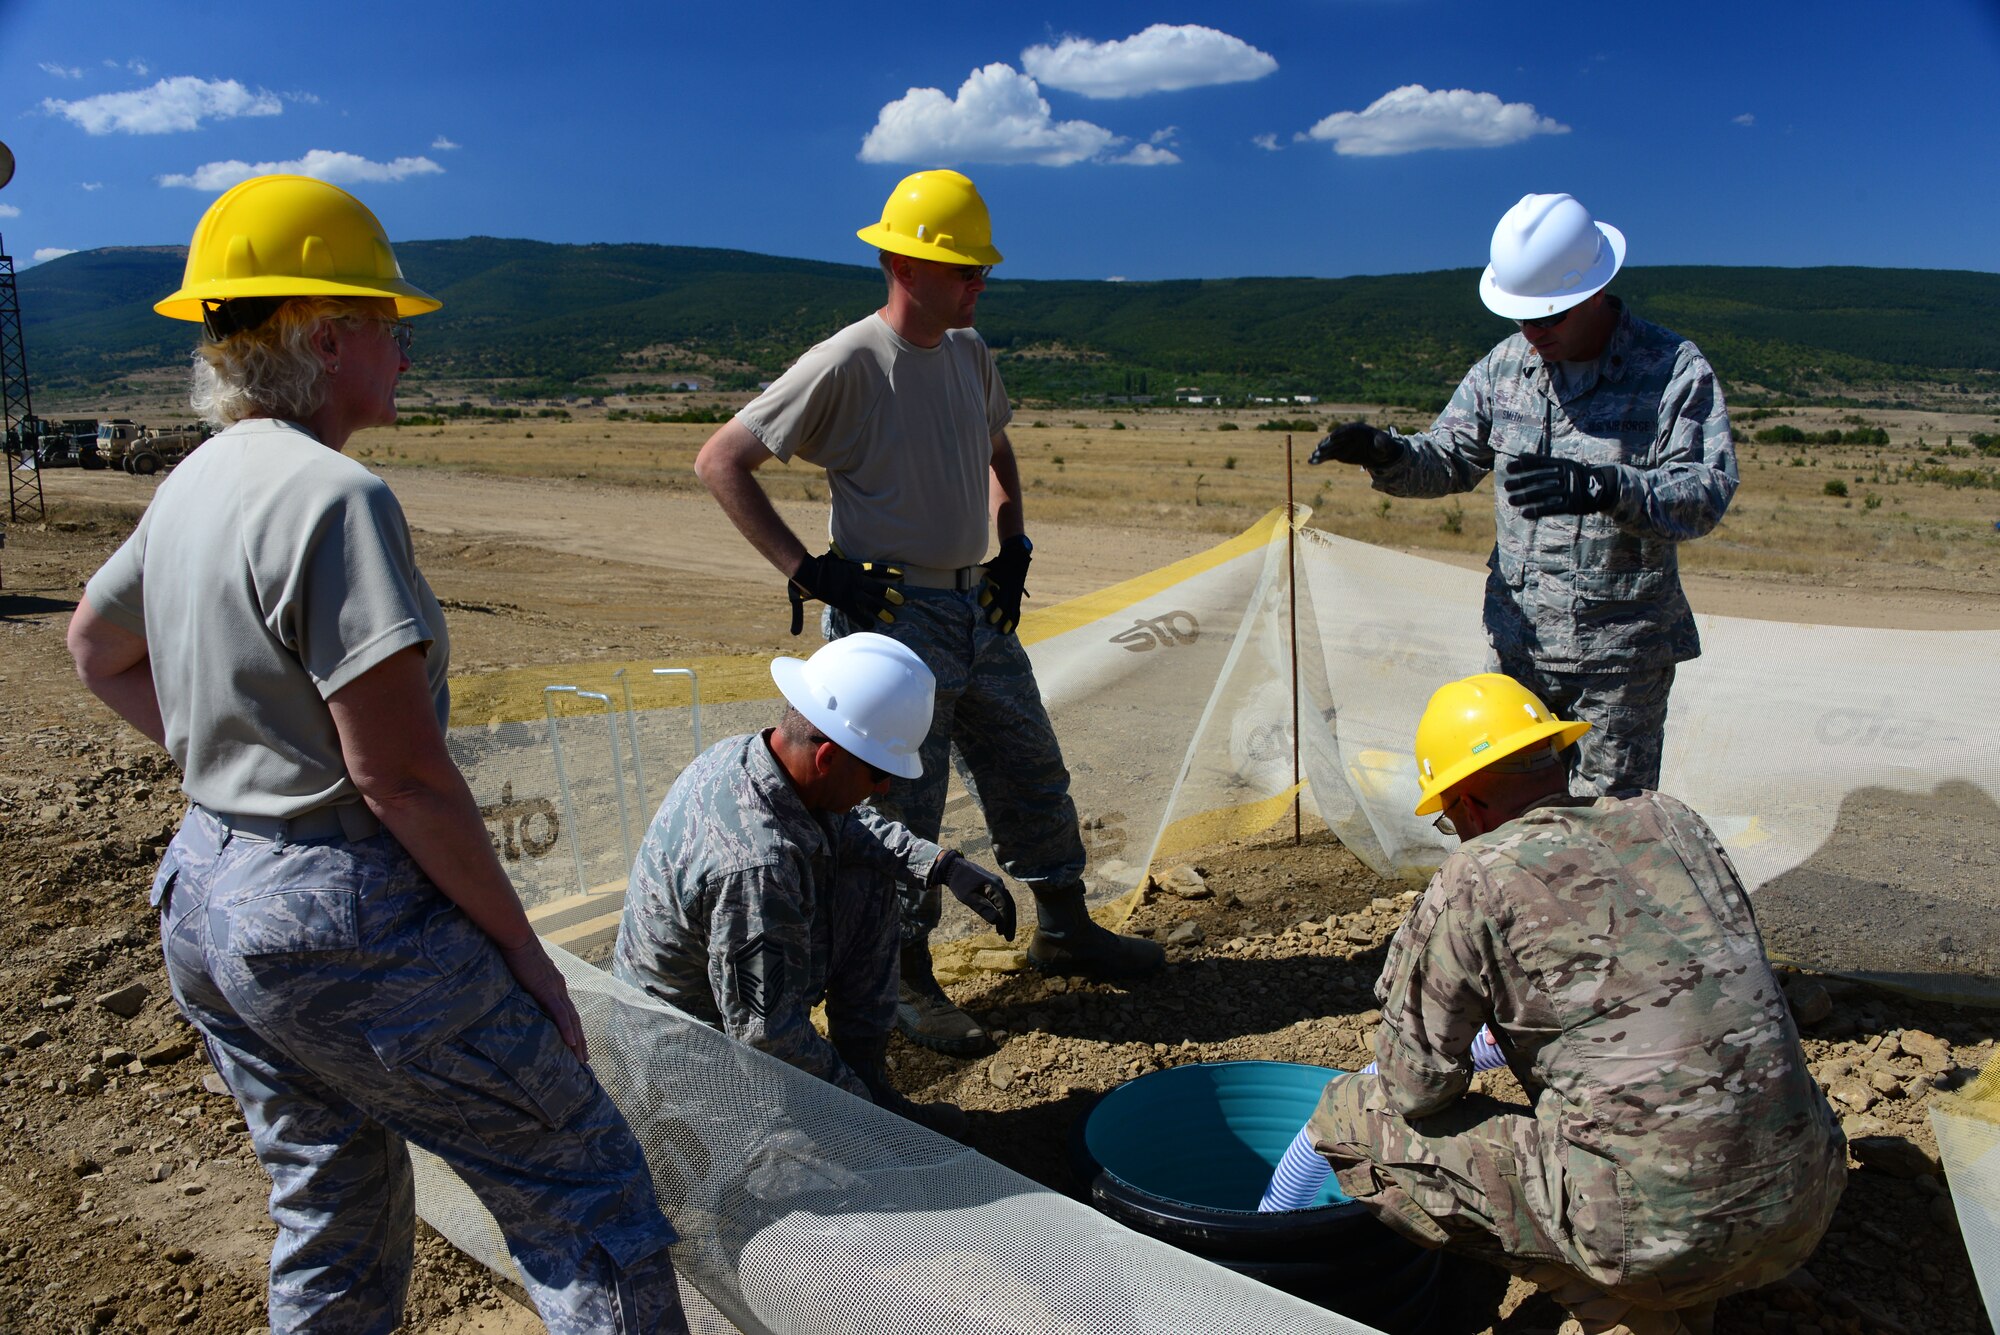 Airmen from the 118th Mission Support Group, Tennessee Air National Guard, and the 194th Engineer Brigade, Tennessee Army National Guard, install lighting foundations at the Ammo Holding Area, better known as the AHA, Aug. 16, 2016, at Novo Selo Training Area, Bulgaria.  Tennessee National Guard Soldiers and Airmen were on rotations to complete thier portions of projects as part of Operation Resolute Castle 16, an ongoing operation of military construction to build up Eastern European base infrastructure and help strengthen ties between Tennessee's state partnership with Bulgaria. (U.S. Air National Guard photo by Master Sgt. Kendra M. Owenby, 134 ARW Public Affairs)